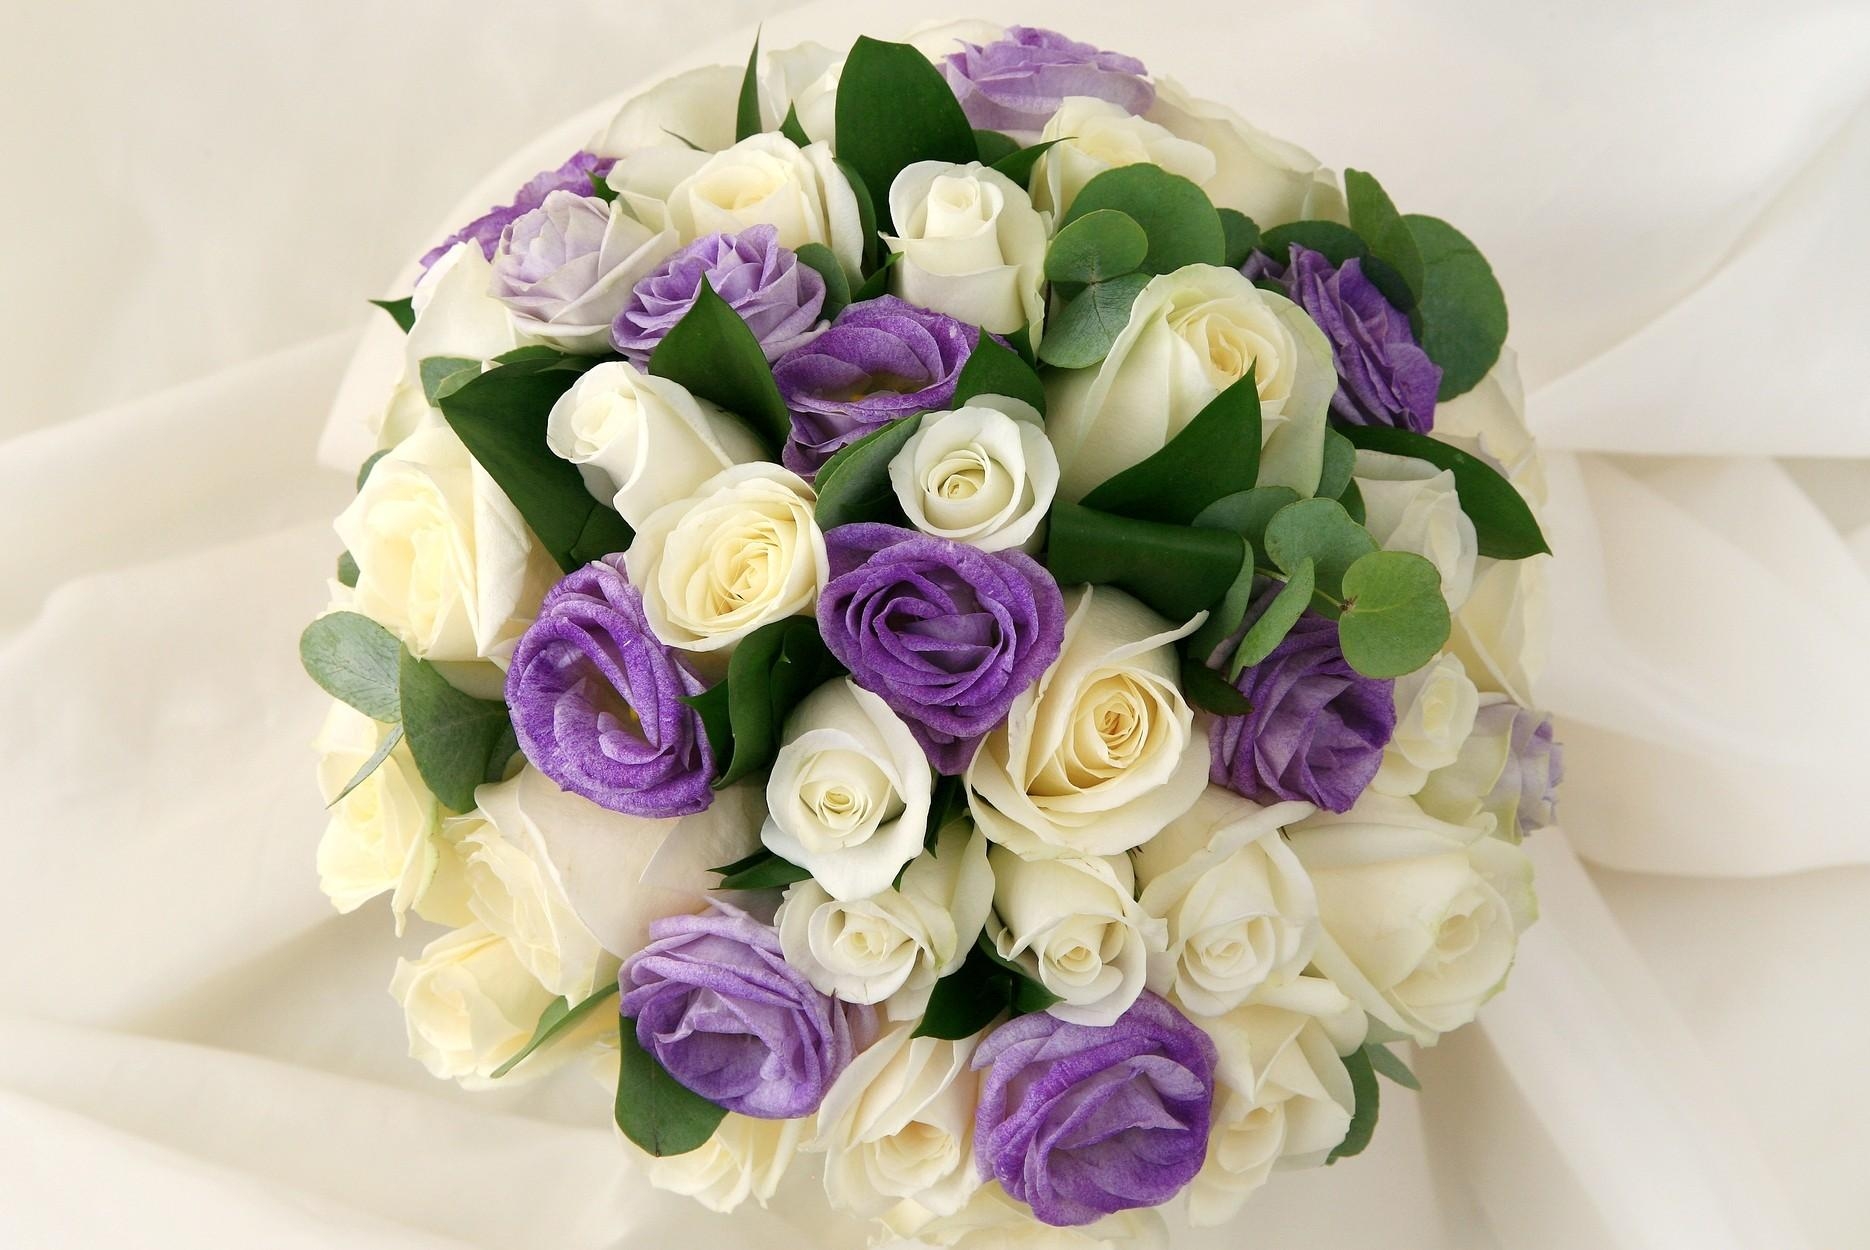 leaves, flowers, roses, bouquet, handsomely, it's beautiful, lisianthus russell, lisiantus russell